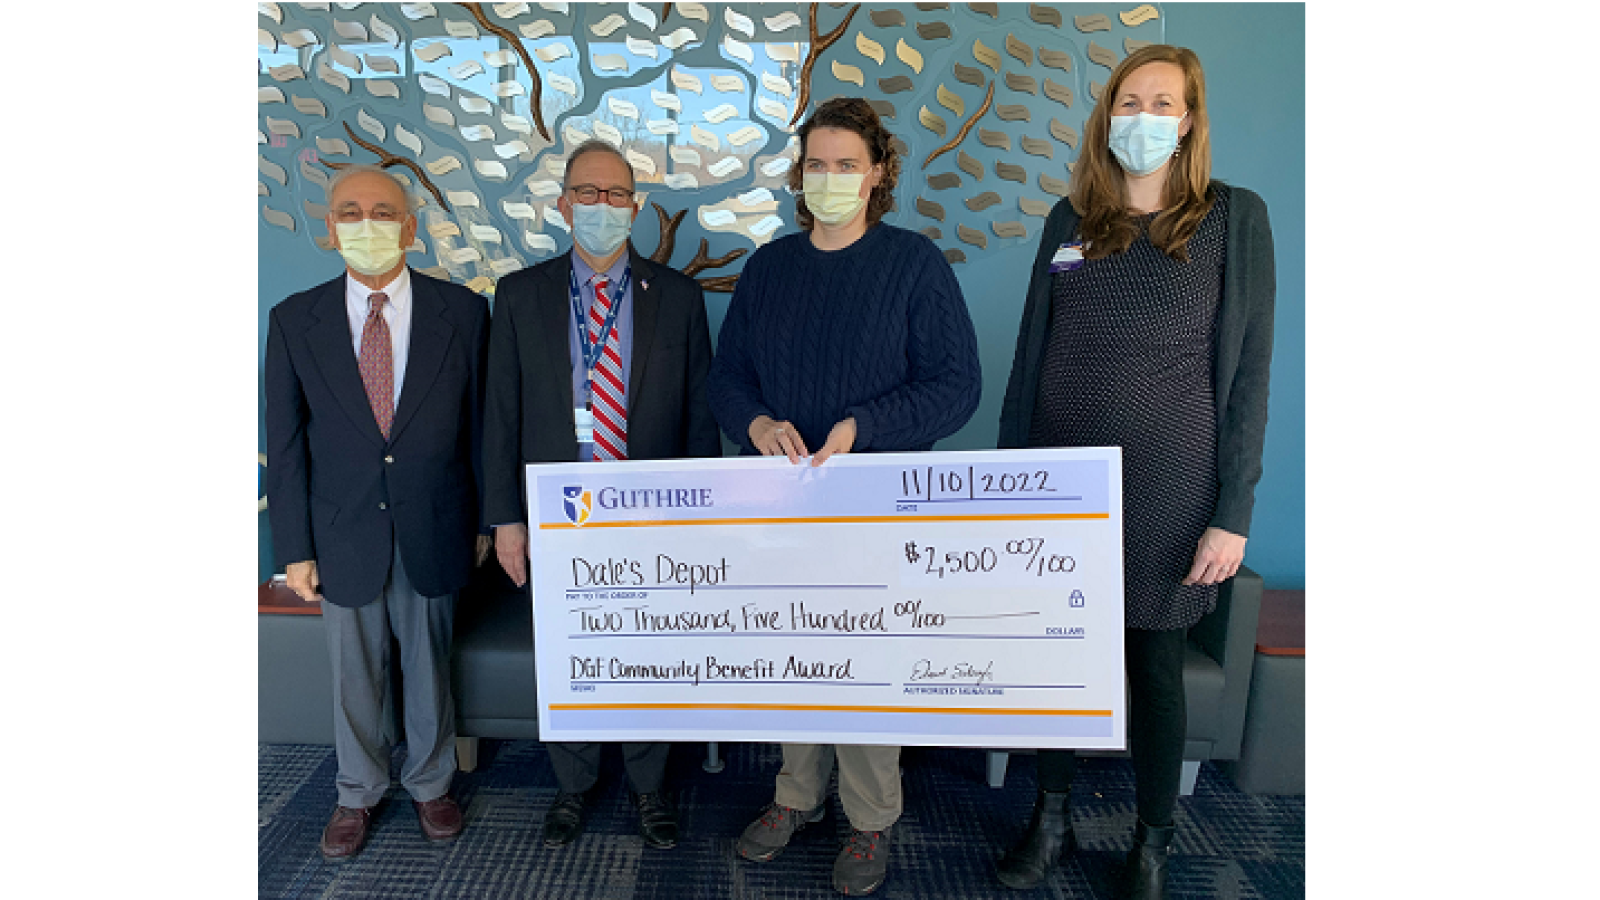 Dr. Charles Fedele, Member of the Donald Guthrie Foundation Community Benefit Committee, Dr. Edmund Sabanegh, Guthrie President and CEO, Julie Kerrick, Director and Founder of Dale's Depot, and Carly Nichols, Program Manager, Community and Hospital Based Projects